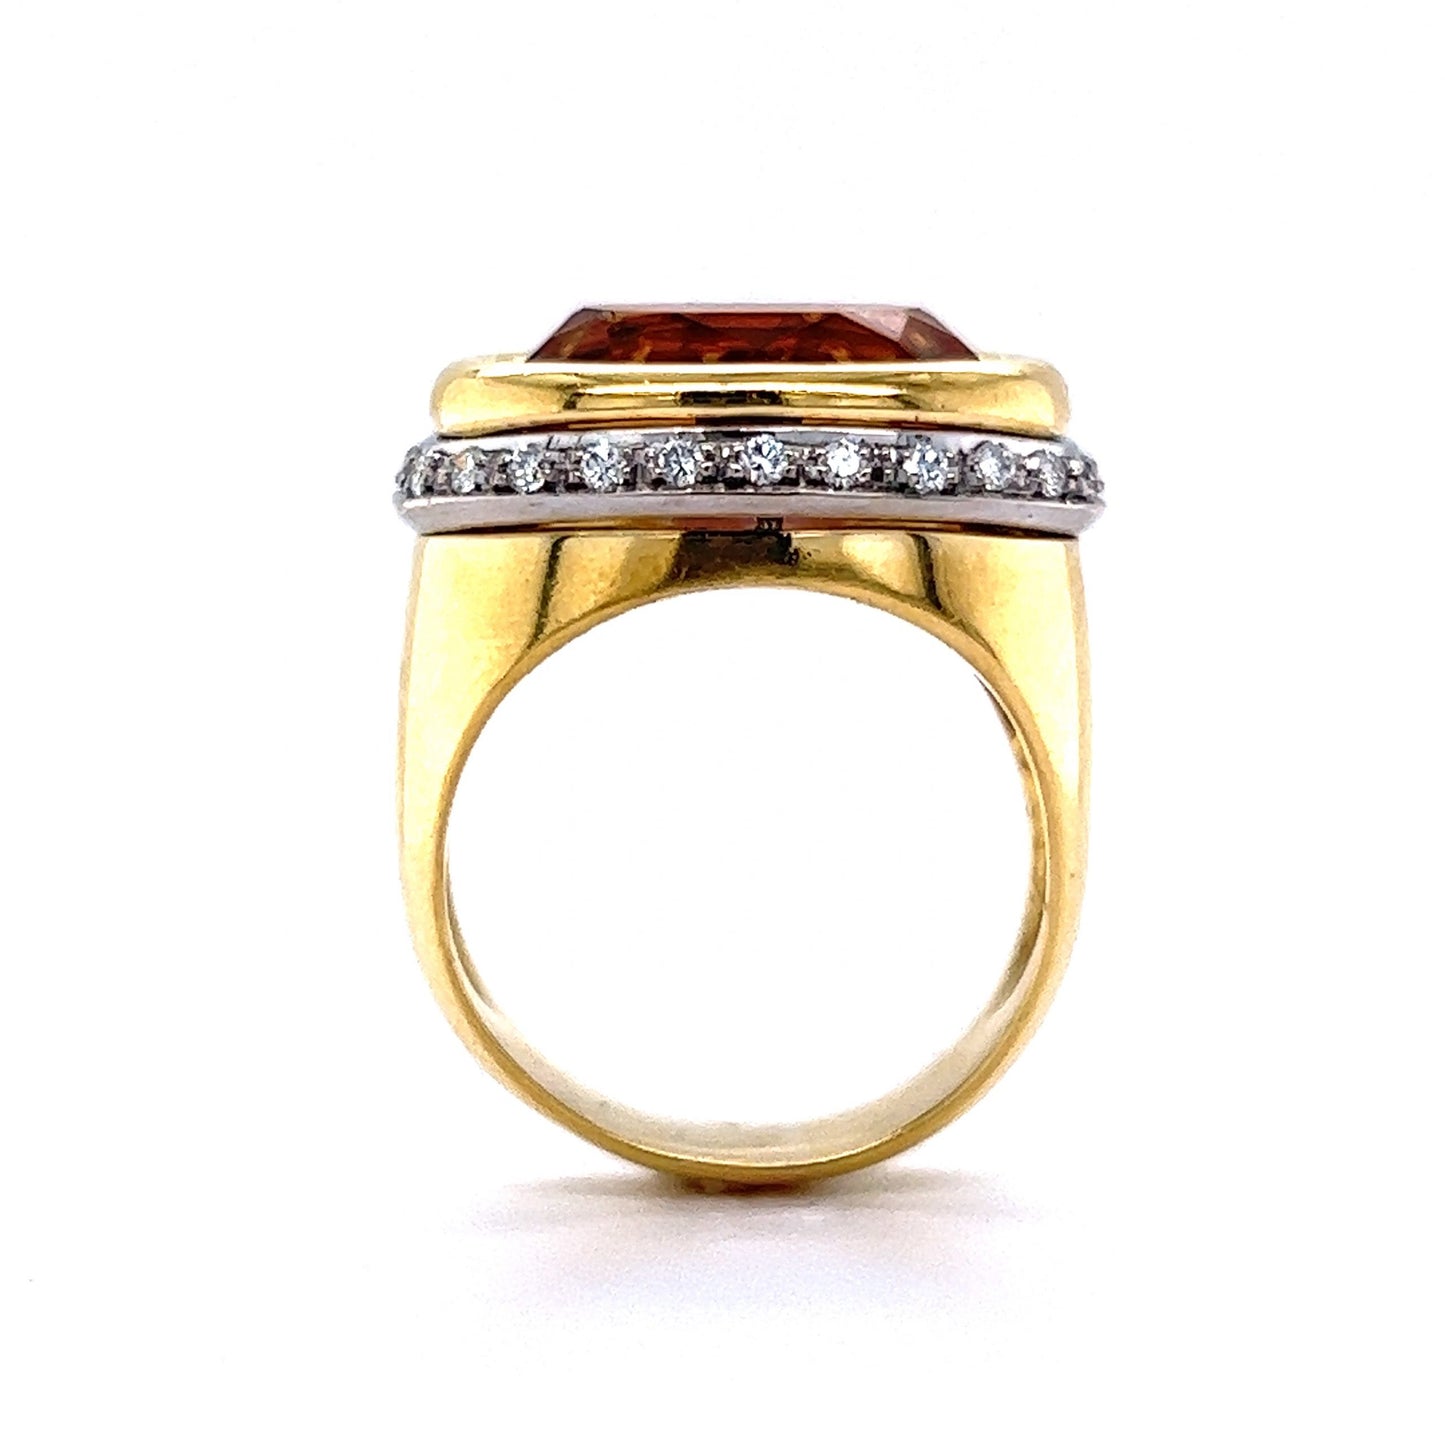 Oval Cut Citrine & Diamond Cocktail Ring in 18k Yellow Gold